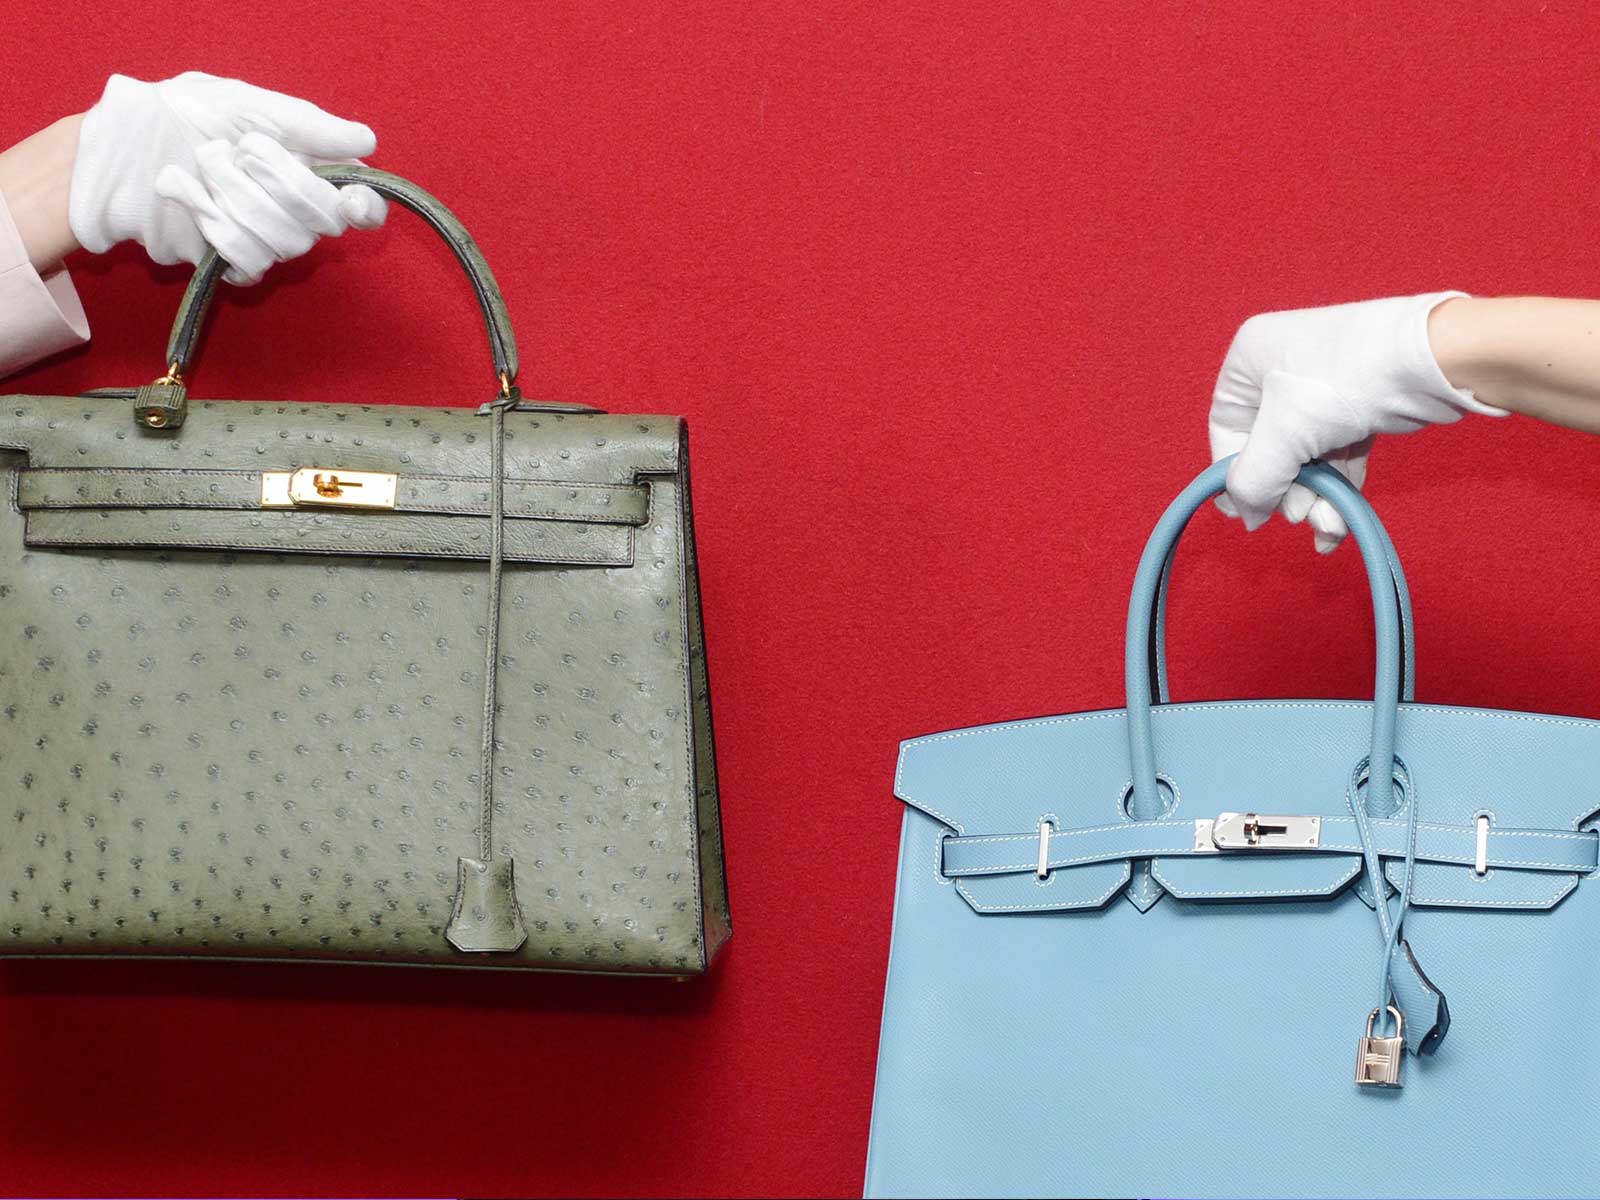 Let’s talk about the luxury auction boom